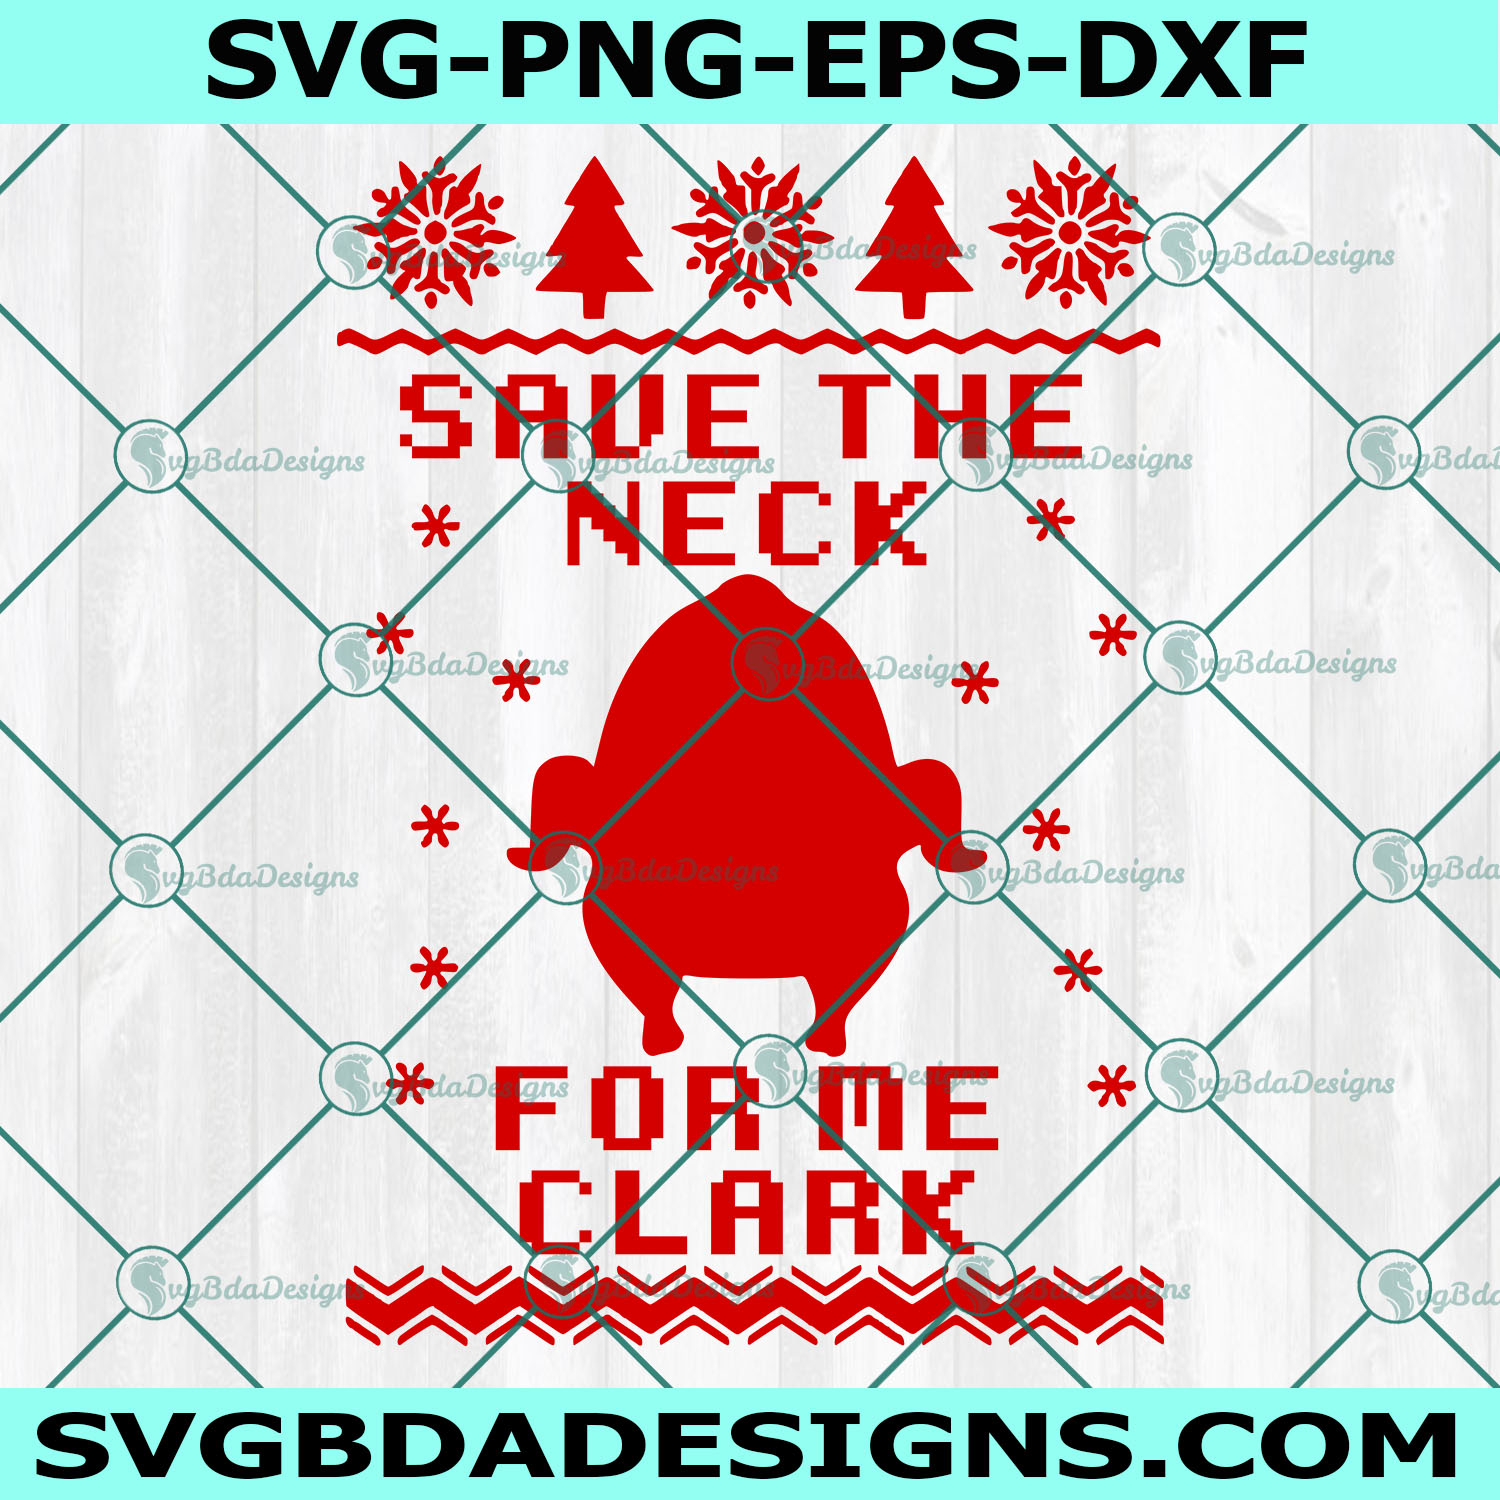 Save the Neck For Me Clark SVG, National Lampoons Christmas Vacation Svg, Griswold Svg, Ugly Christmas Sweater Svg, Digital Download